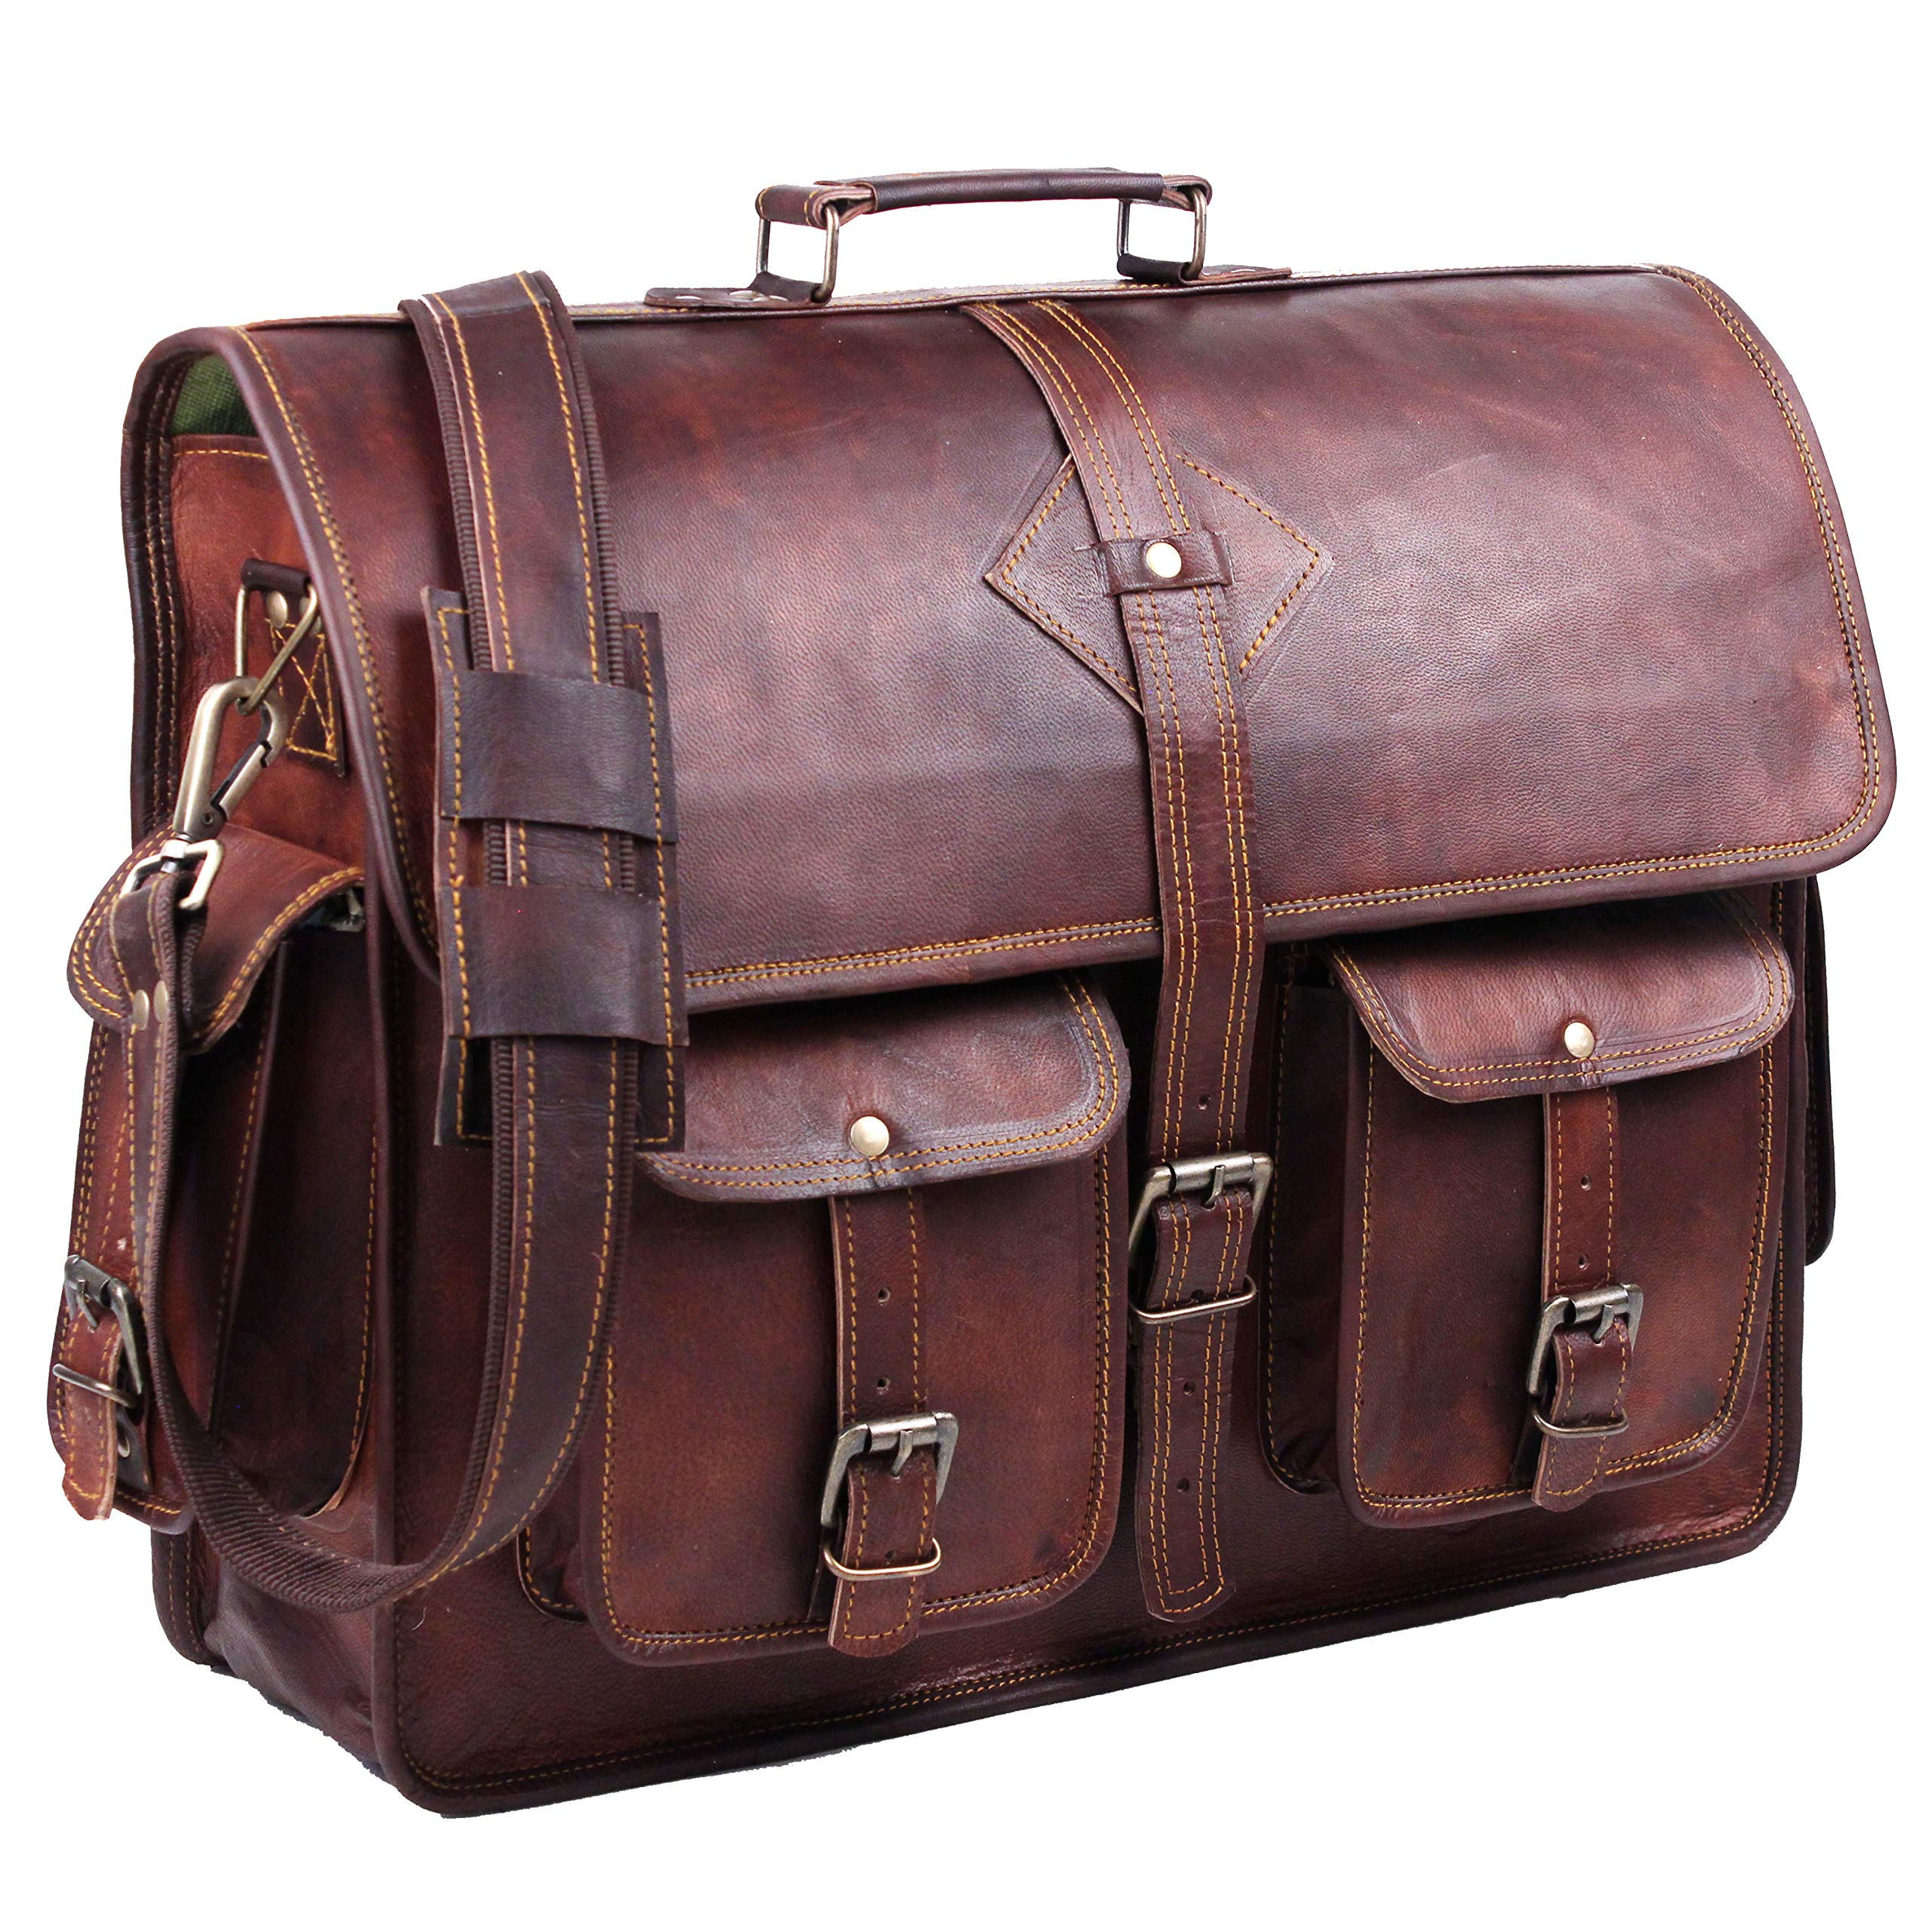 Discover 71+ pure leather laptop bags latest - in.duhocakina